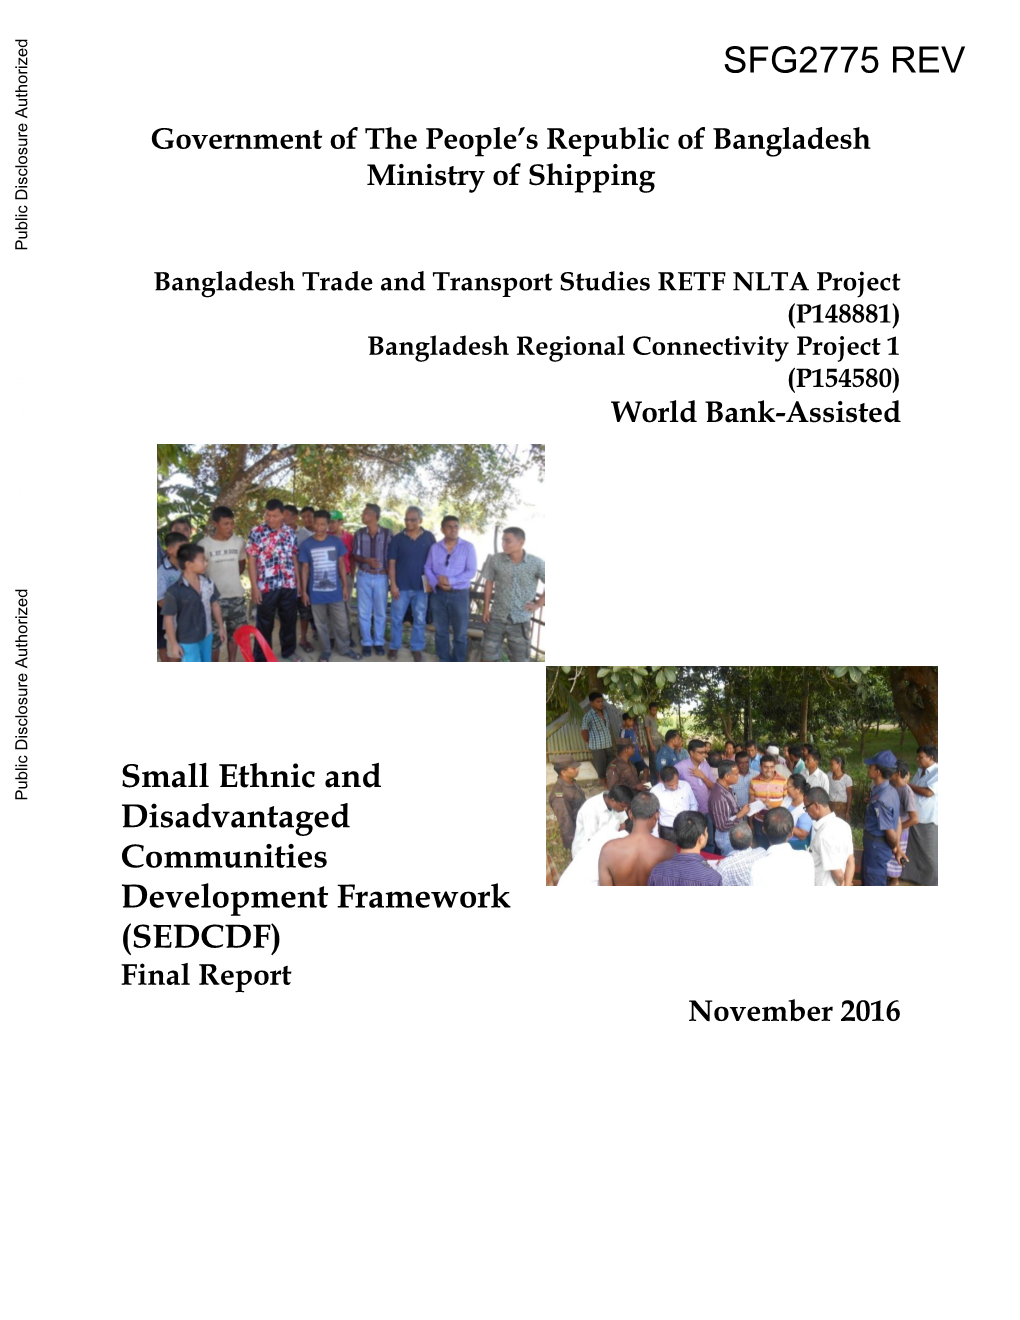 Bangladesh Regional Connectivity Project 1 (P154580) World Bank-Assisted Public Disclosure Authorized